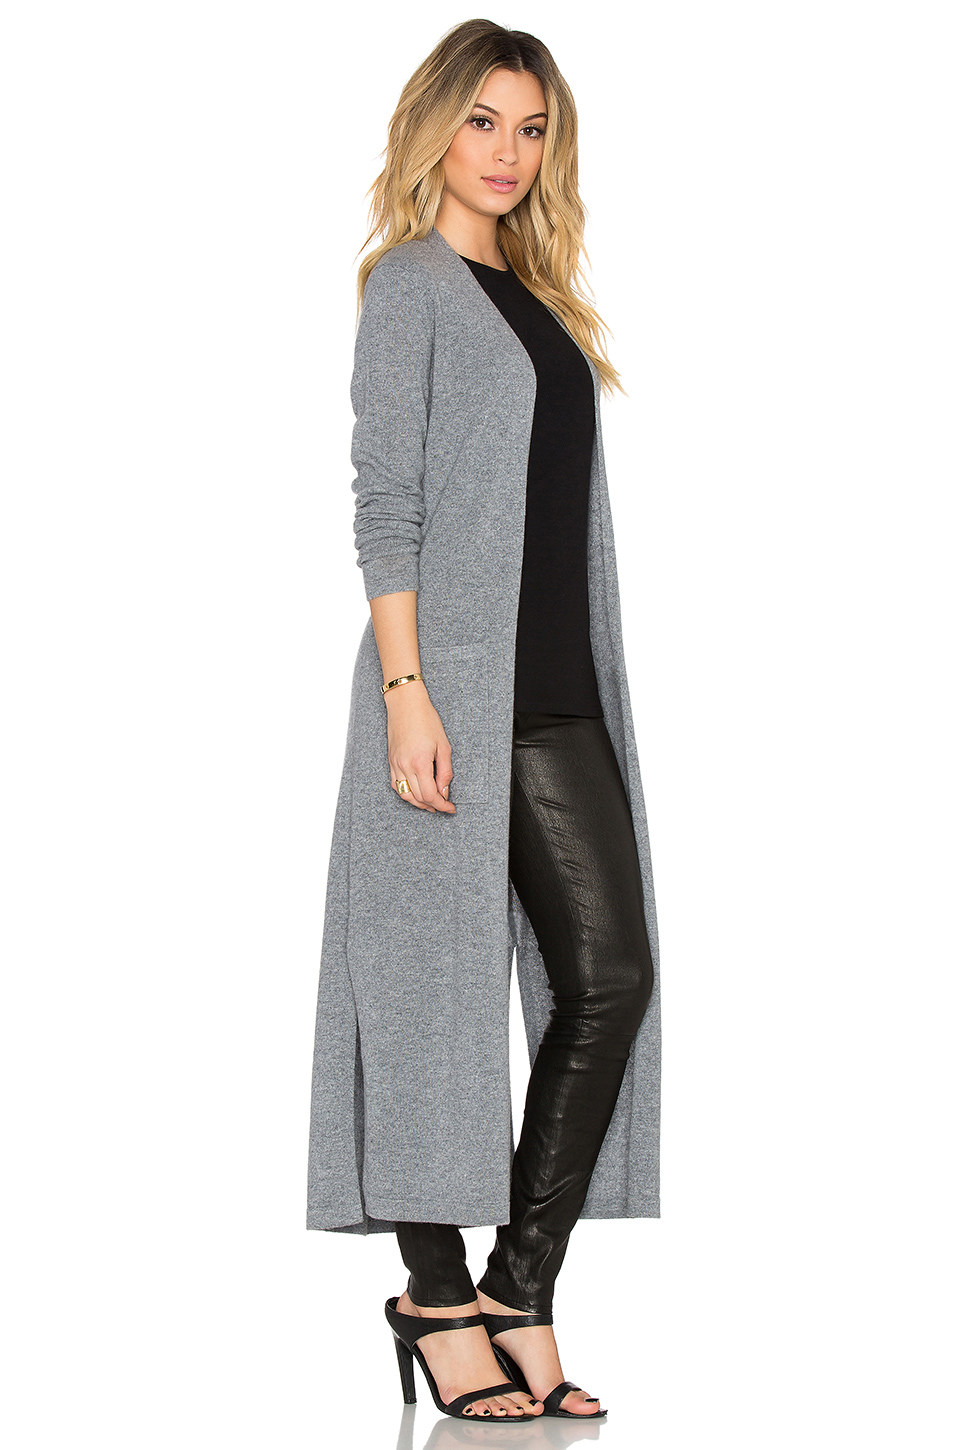 Winter amazon long grey cardigan for ladies shoes sale size chart